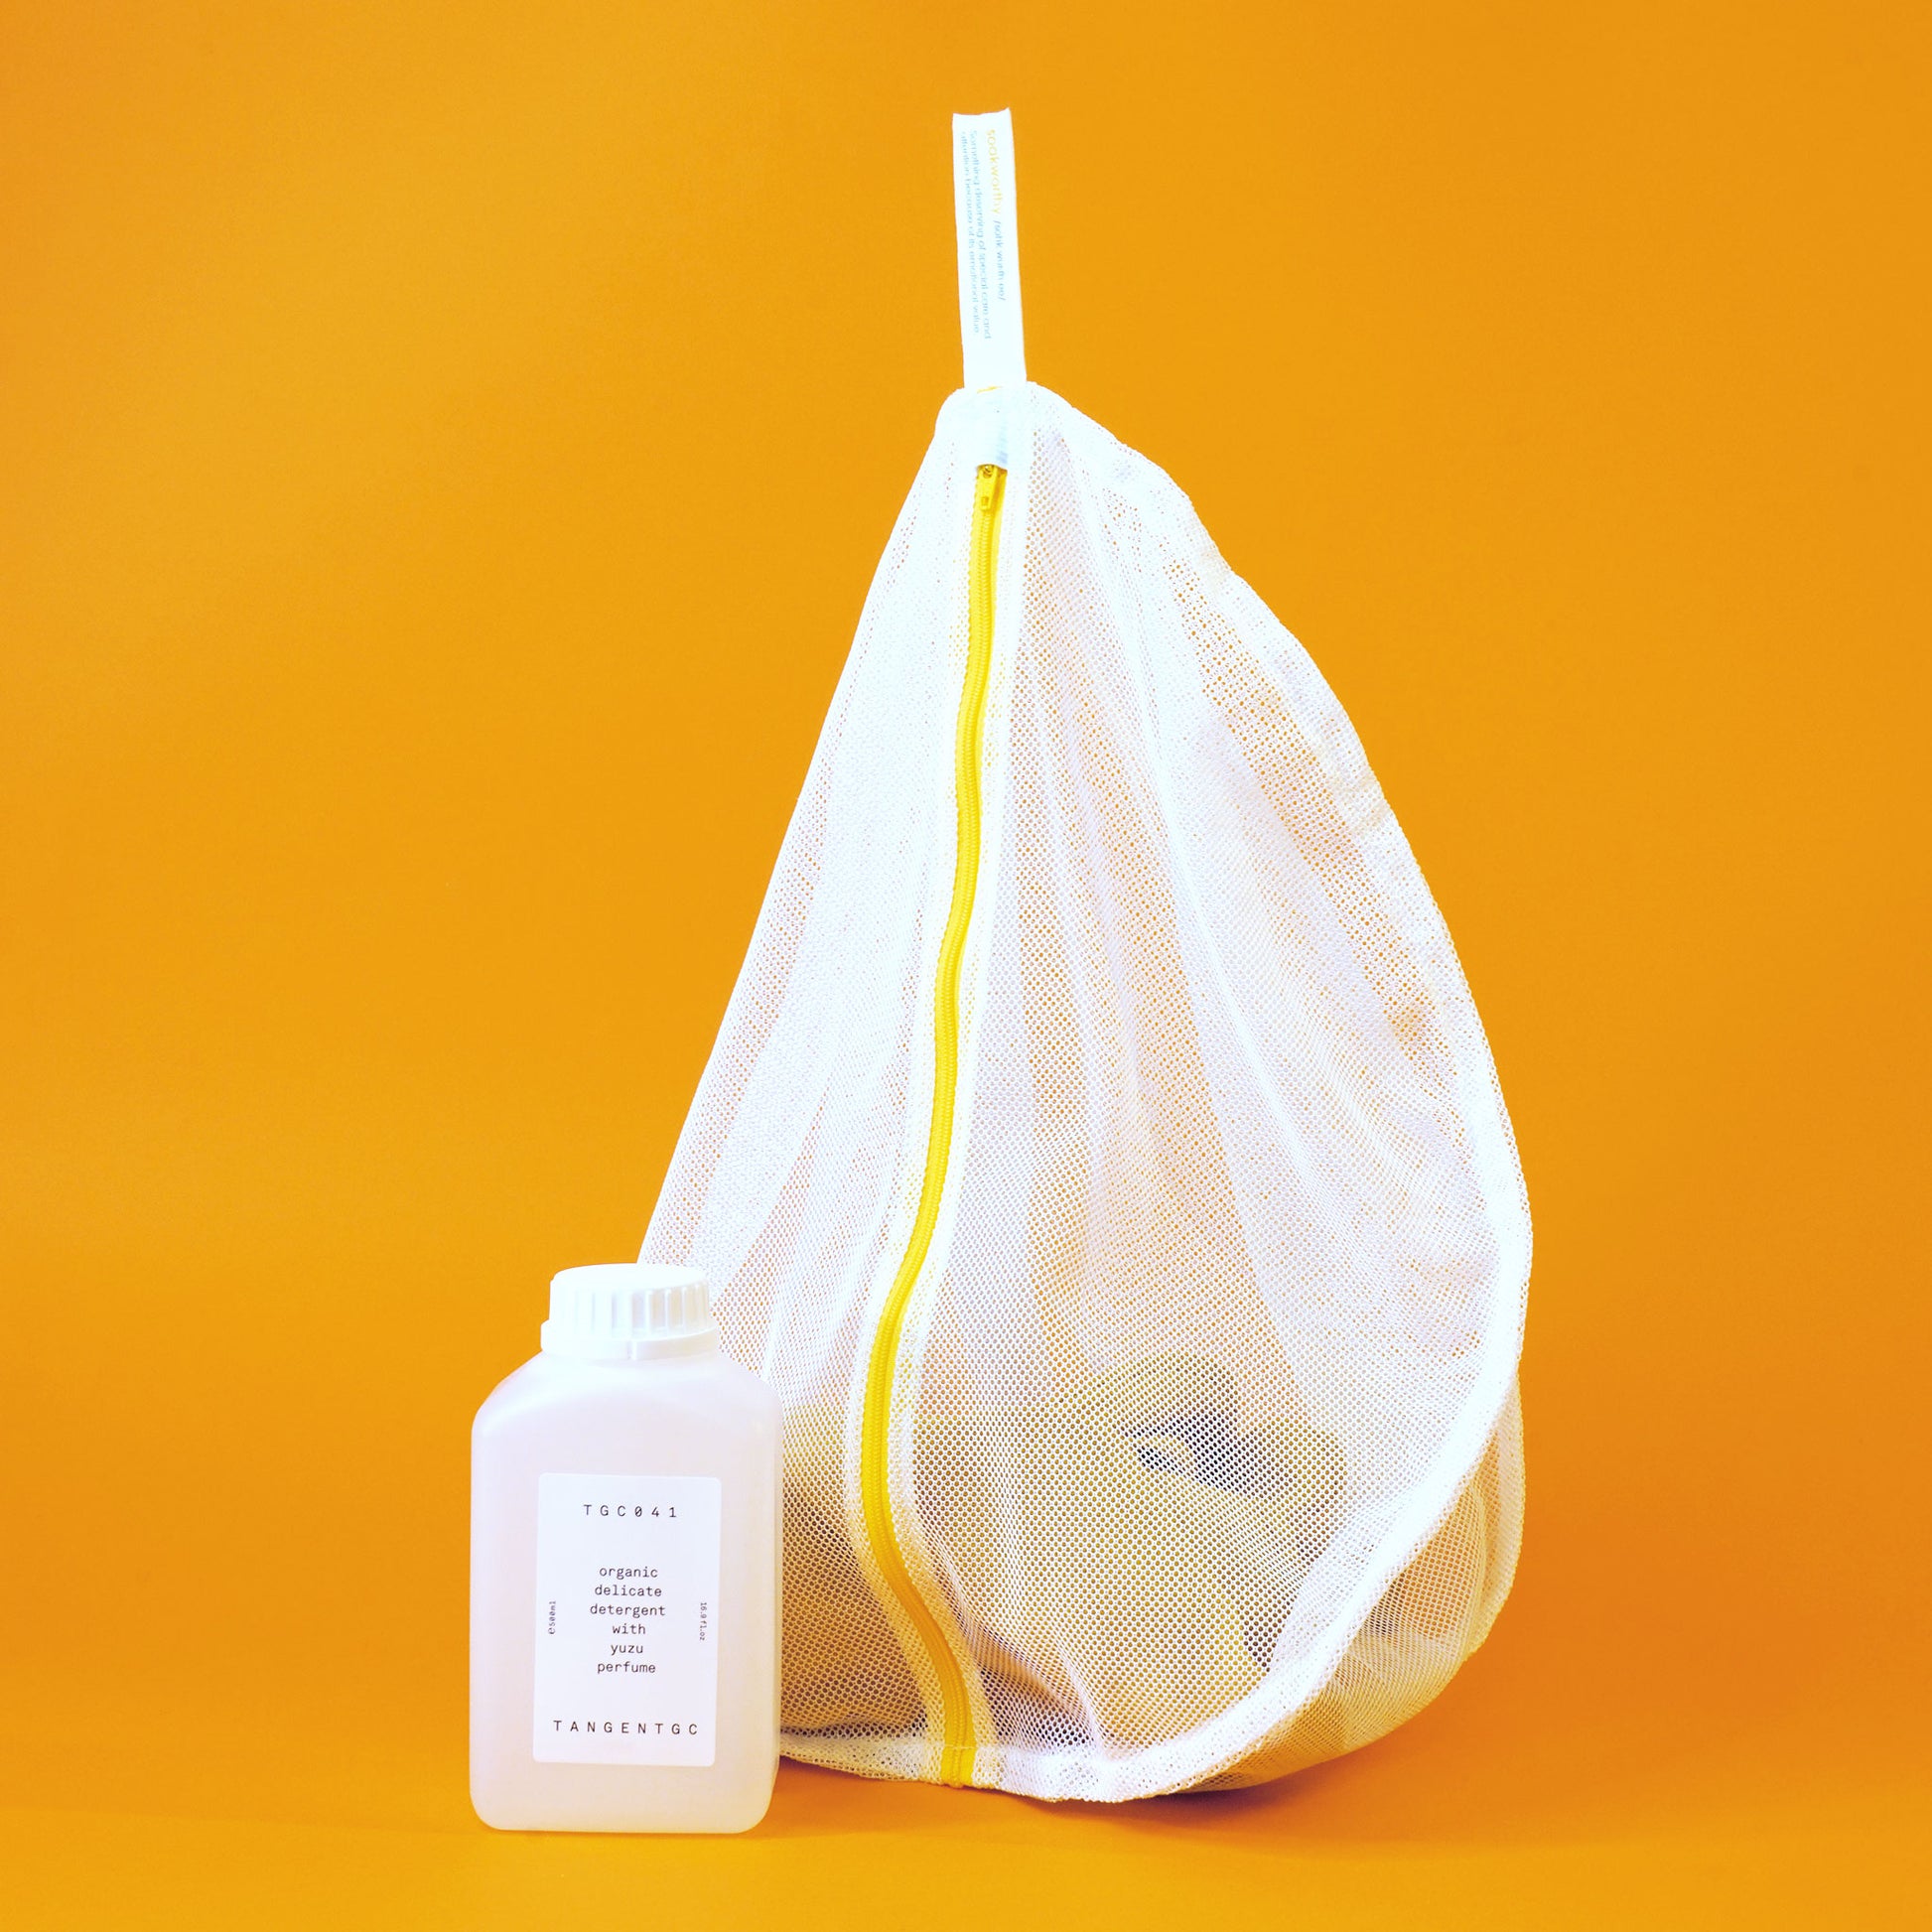 White mesh delicates bag by Soak with a yellow zipper; a piece of soft khaki clothing is visible inside and a bottle of delicate detergent is beside it